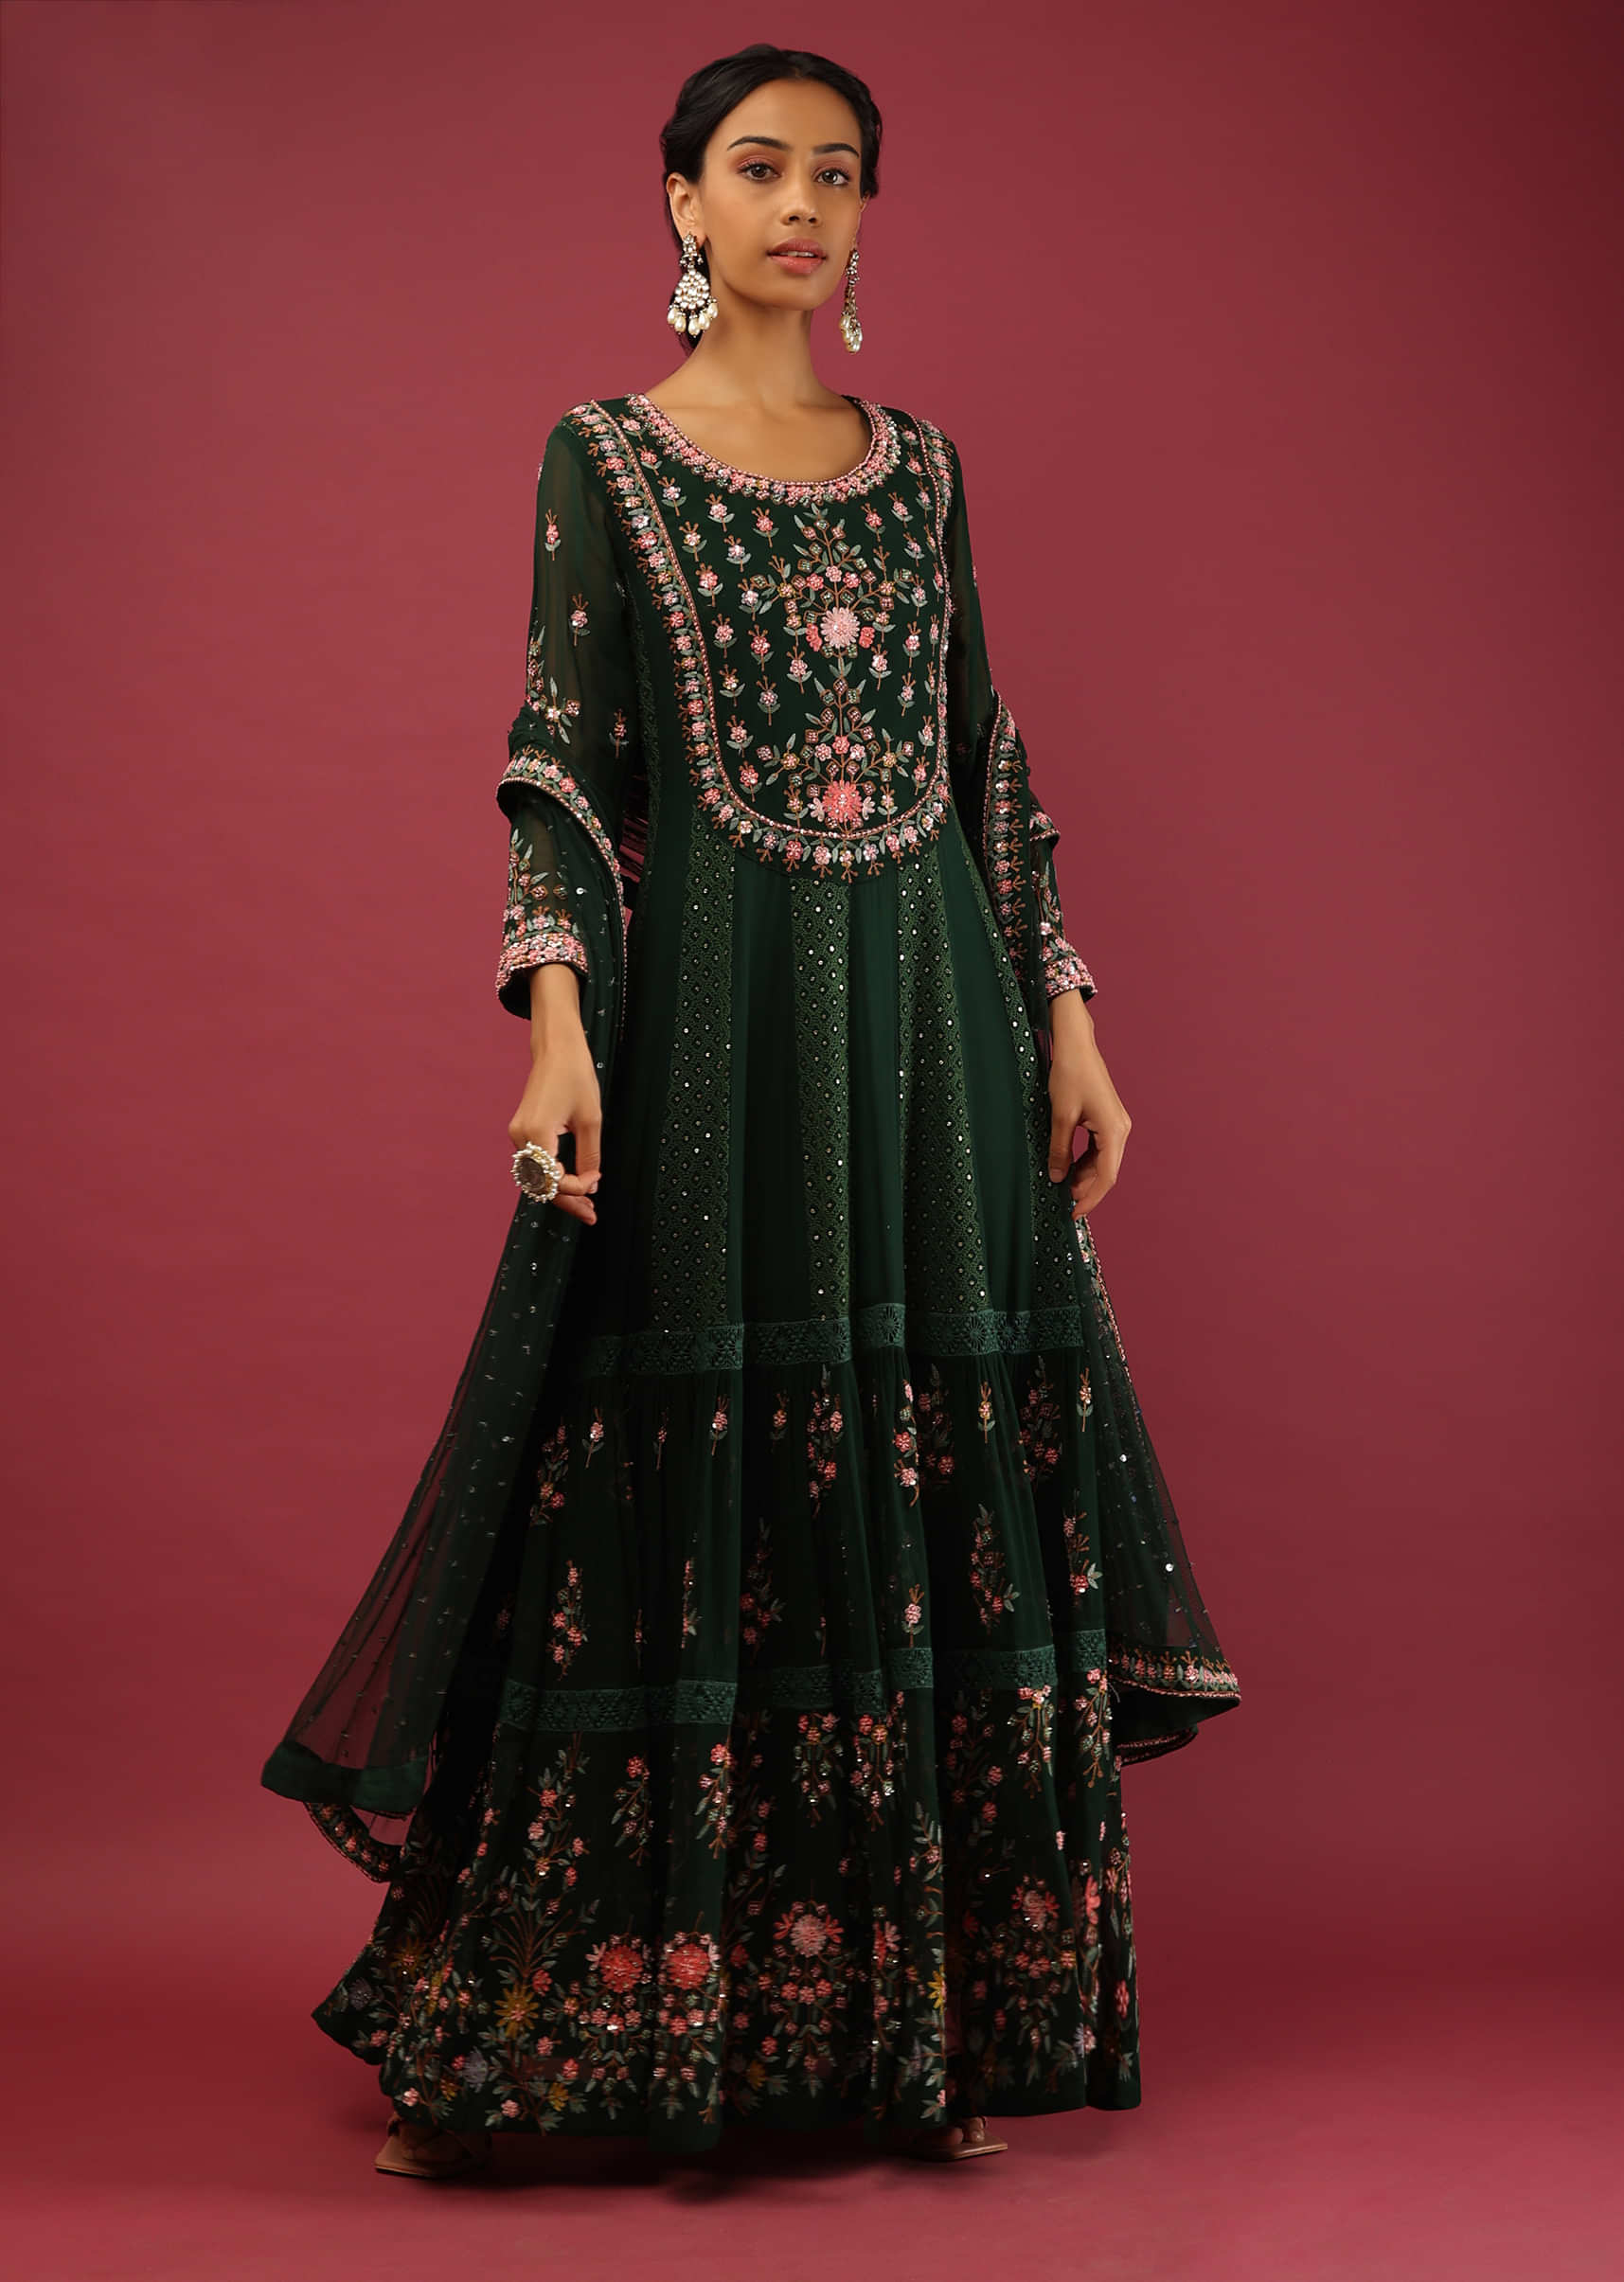 Bottle Green Anarkali Suit In Georgette With Organza Tiers Adorned In Colorful Resham Embroidery In Floral Motifs  